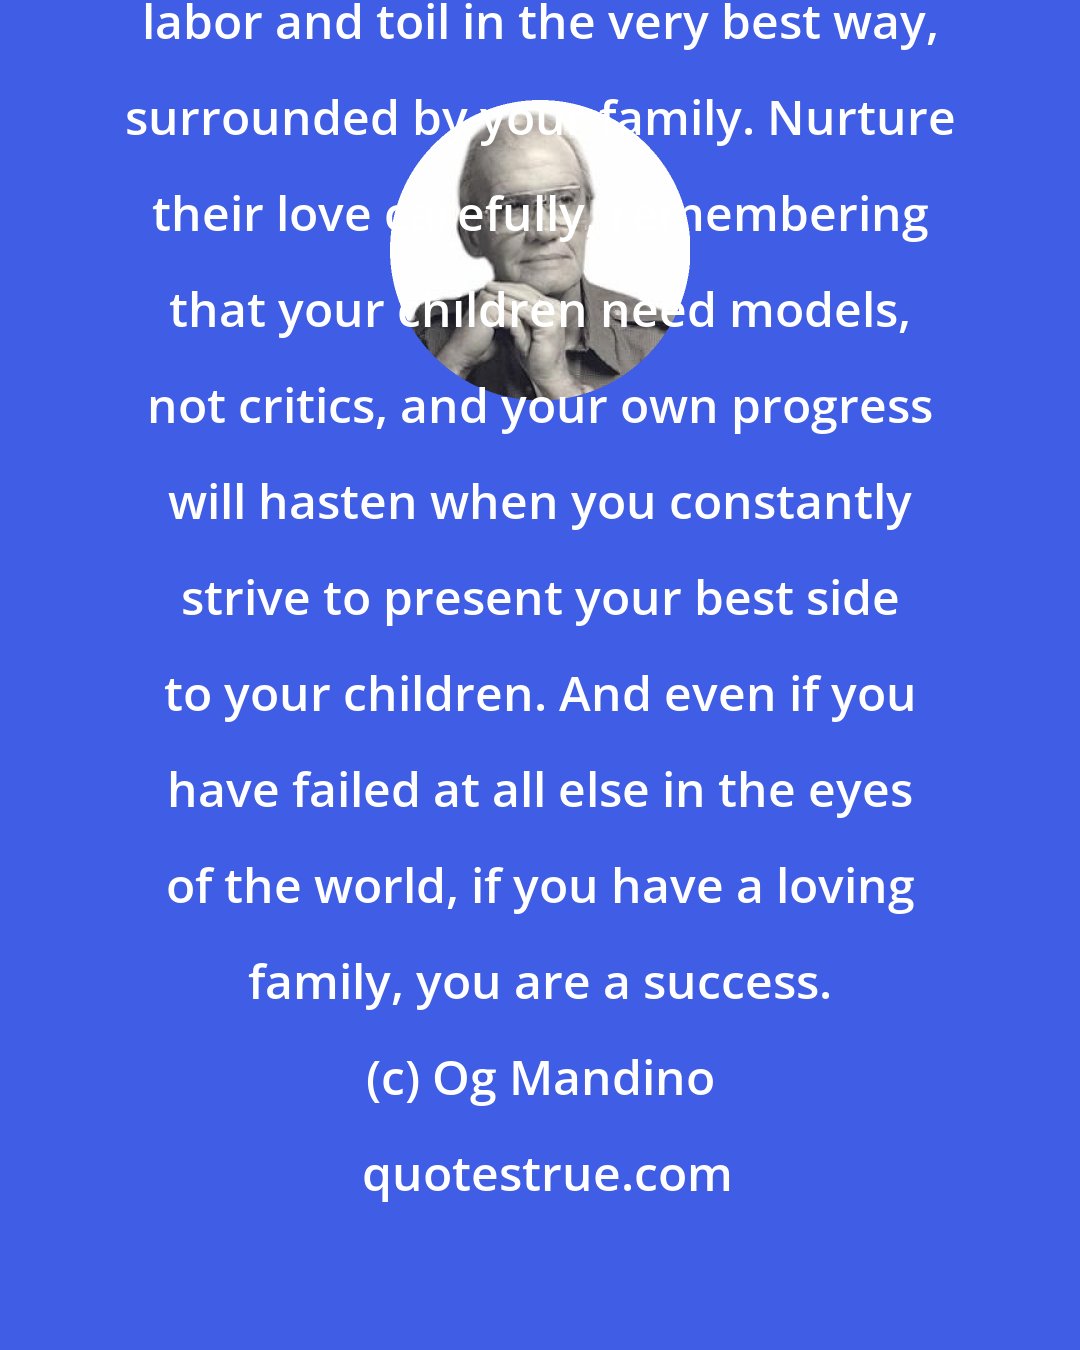 Og Mandino: Always reward your long hours of labor and toil in the very best way, surrounded by your family. Nurture their love carefully, remembering that your children need models, not critics, and your own progress will hasten when you constantly strive to present your best side to your children. And even if you have failed at all else in the eyes of the world, if you have a loving family, you are a success.